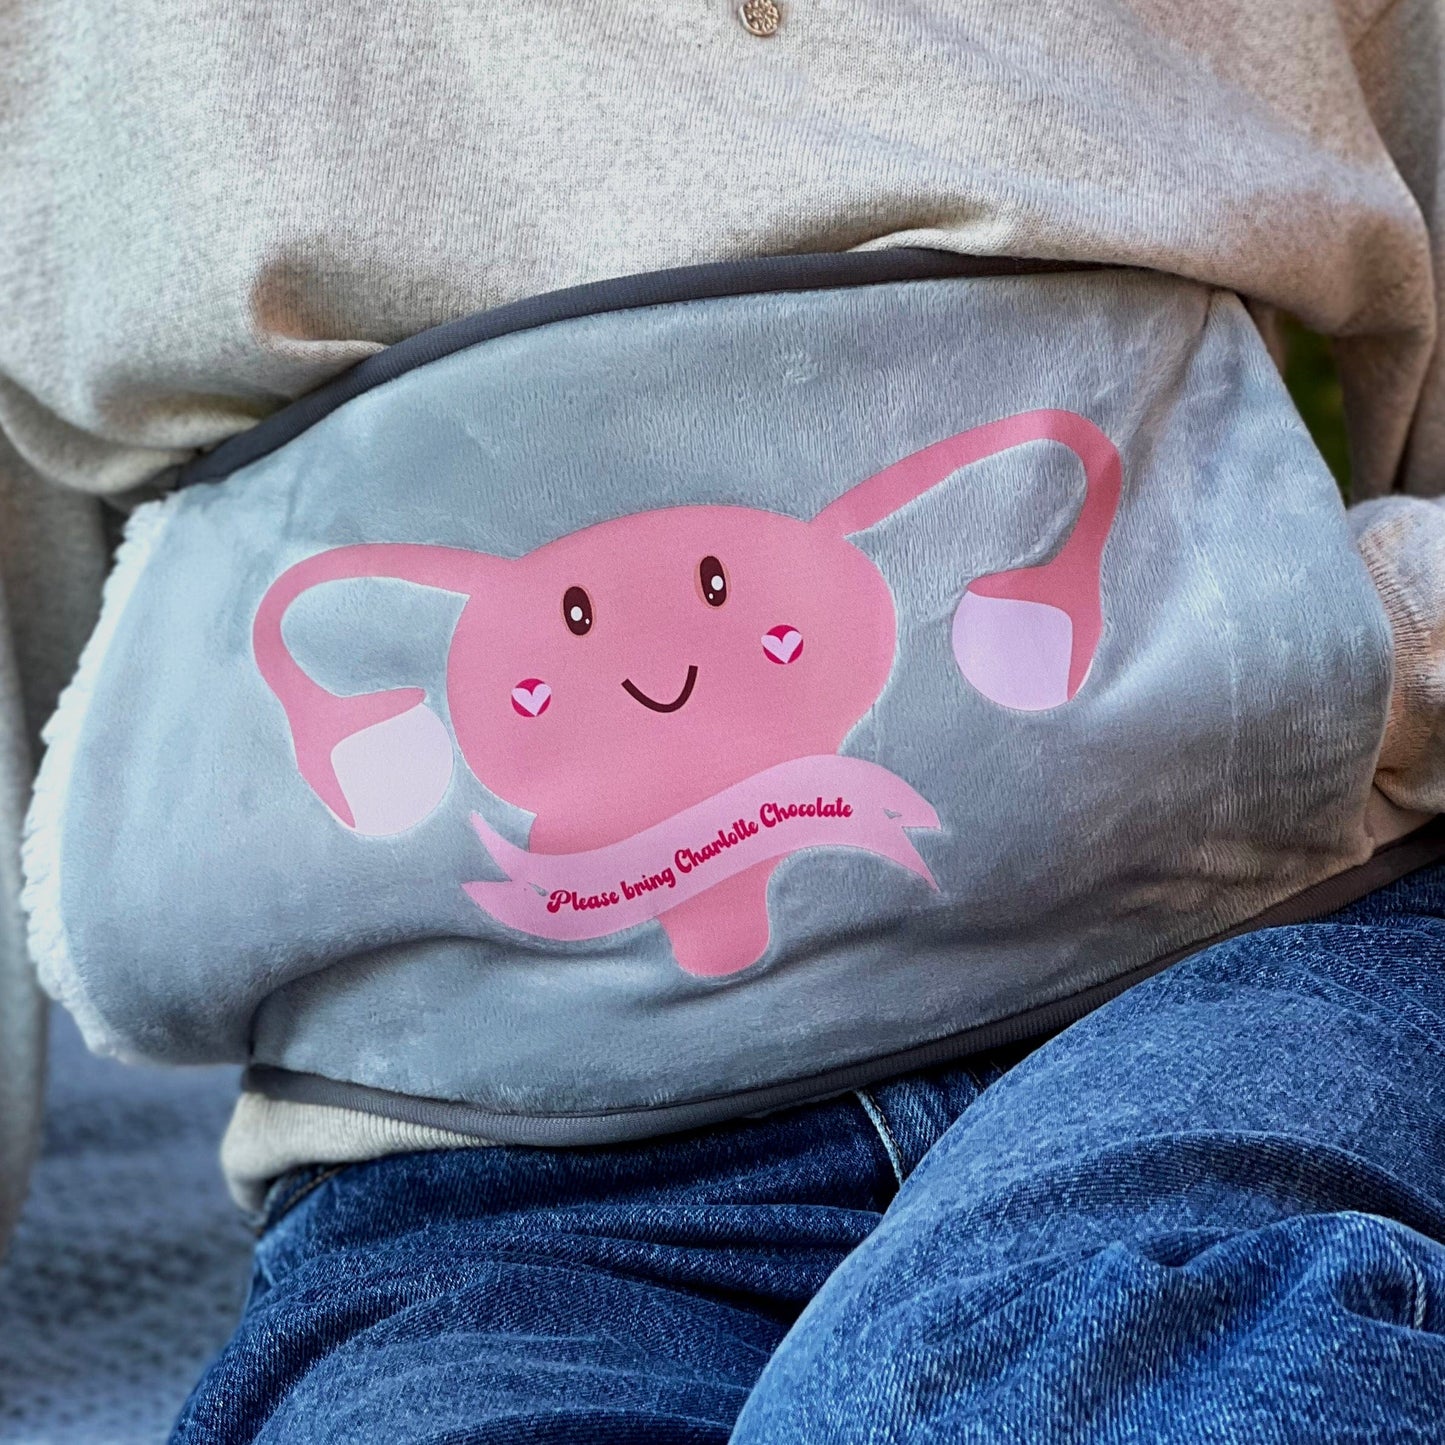 Wearable Hot Water Bottle With Uterus Design